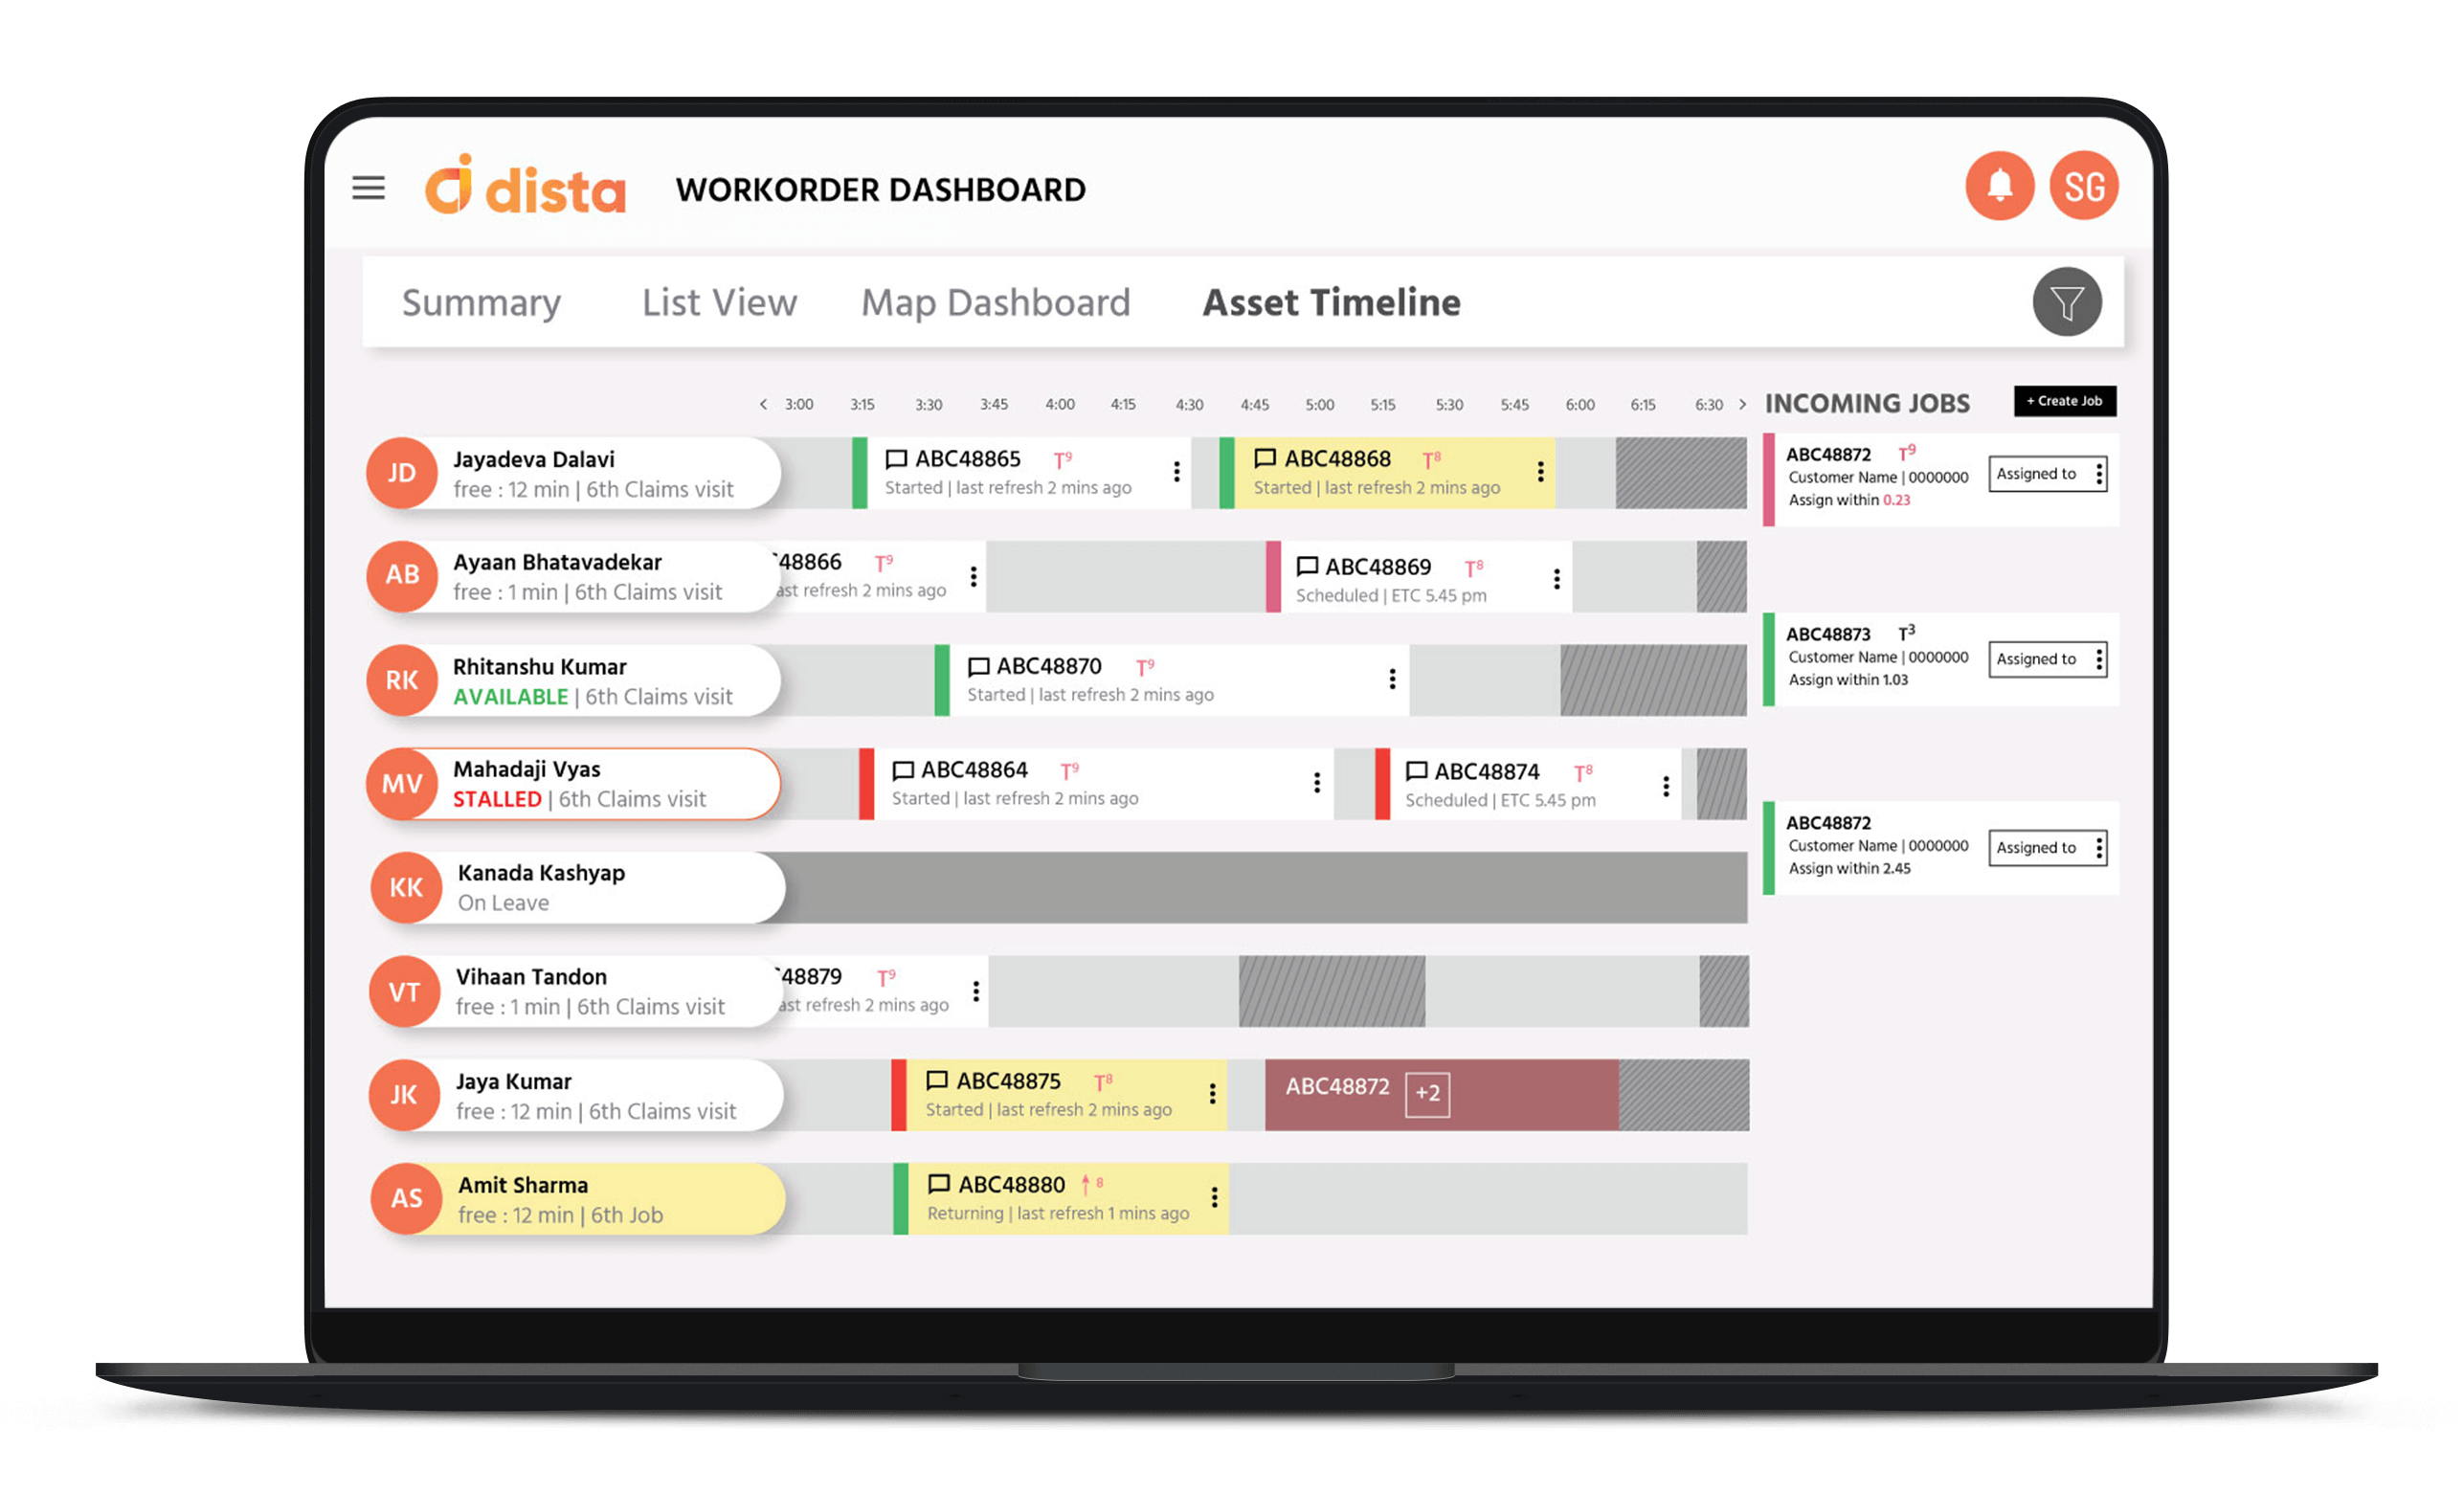 Track team performance - Get an overview of the teams schedule that makes planning effortless and fool-proof.  Get complete transparency on your teams activities and performance.